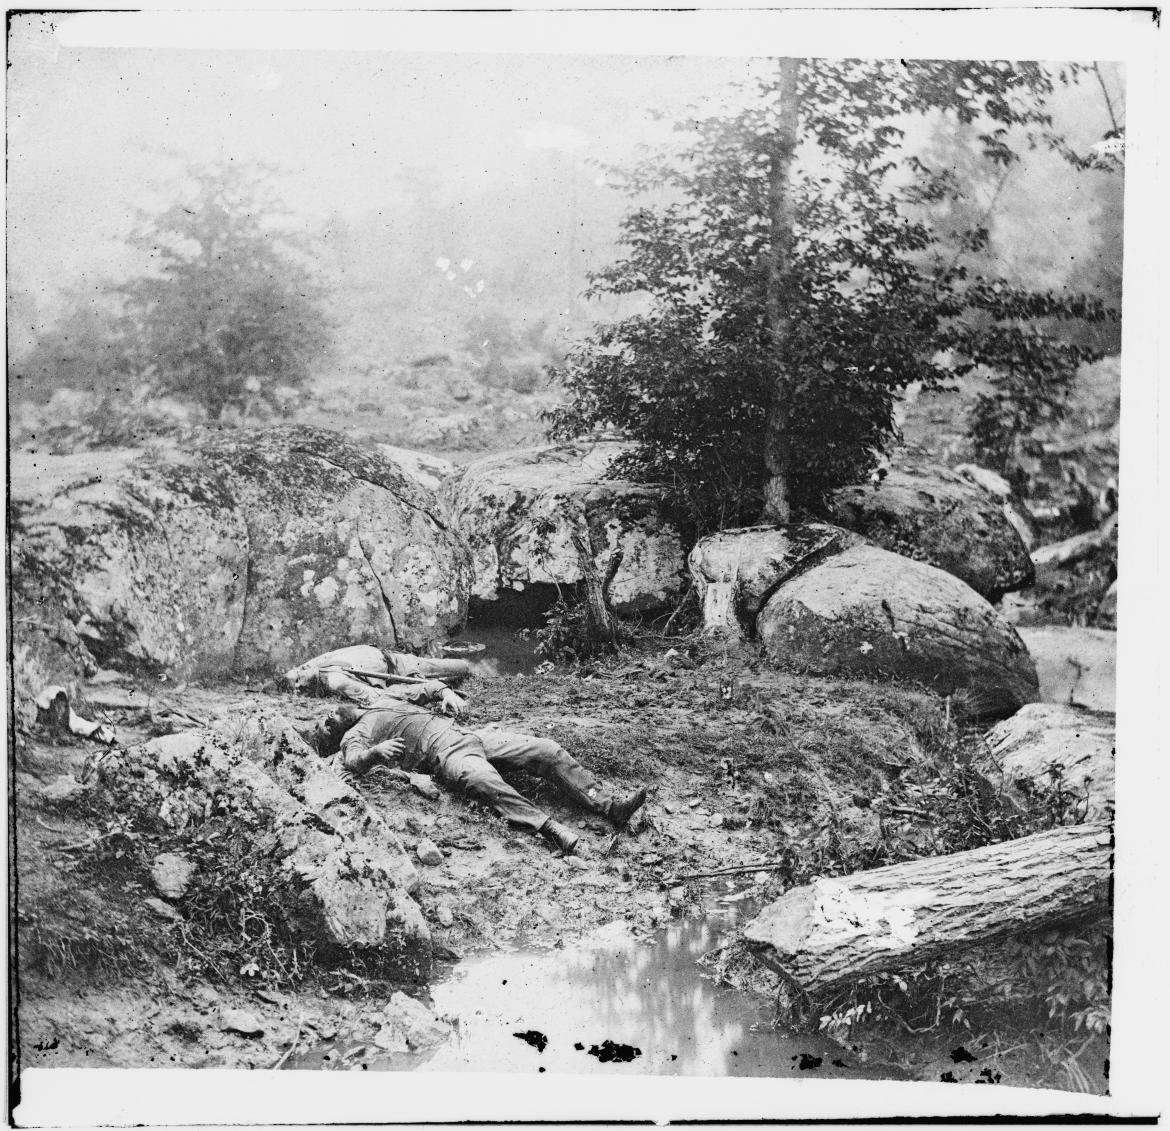 'Dead Confederate soldiers in the â€˜slaughter penâ€™ at the foot of Little Round Top'